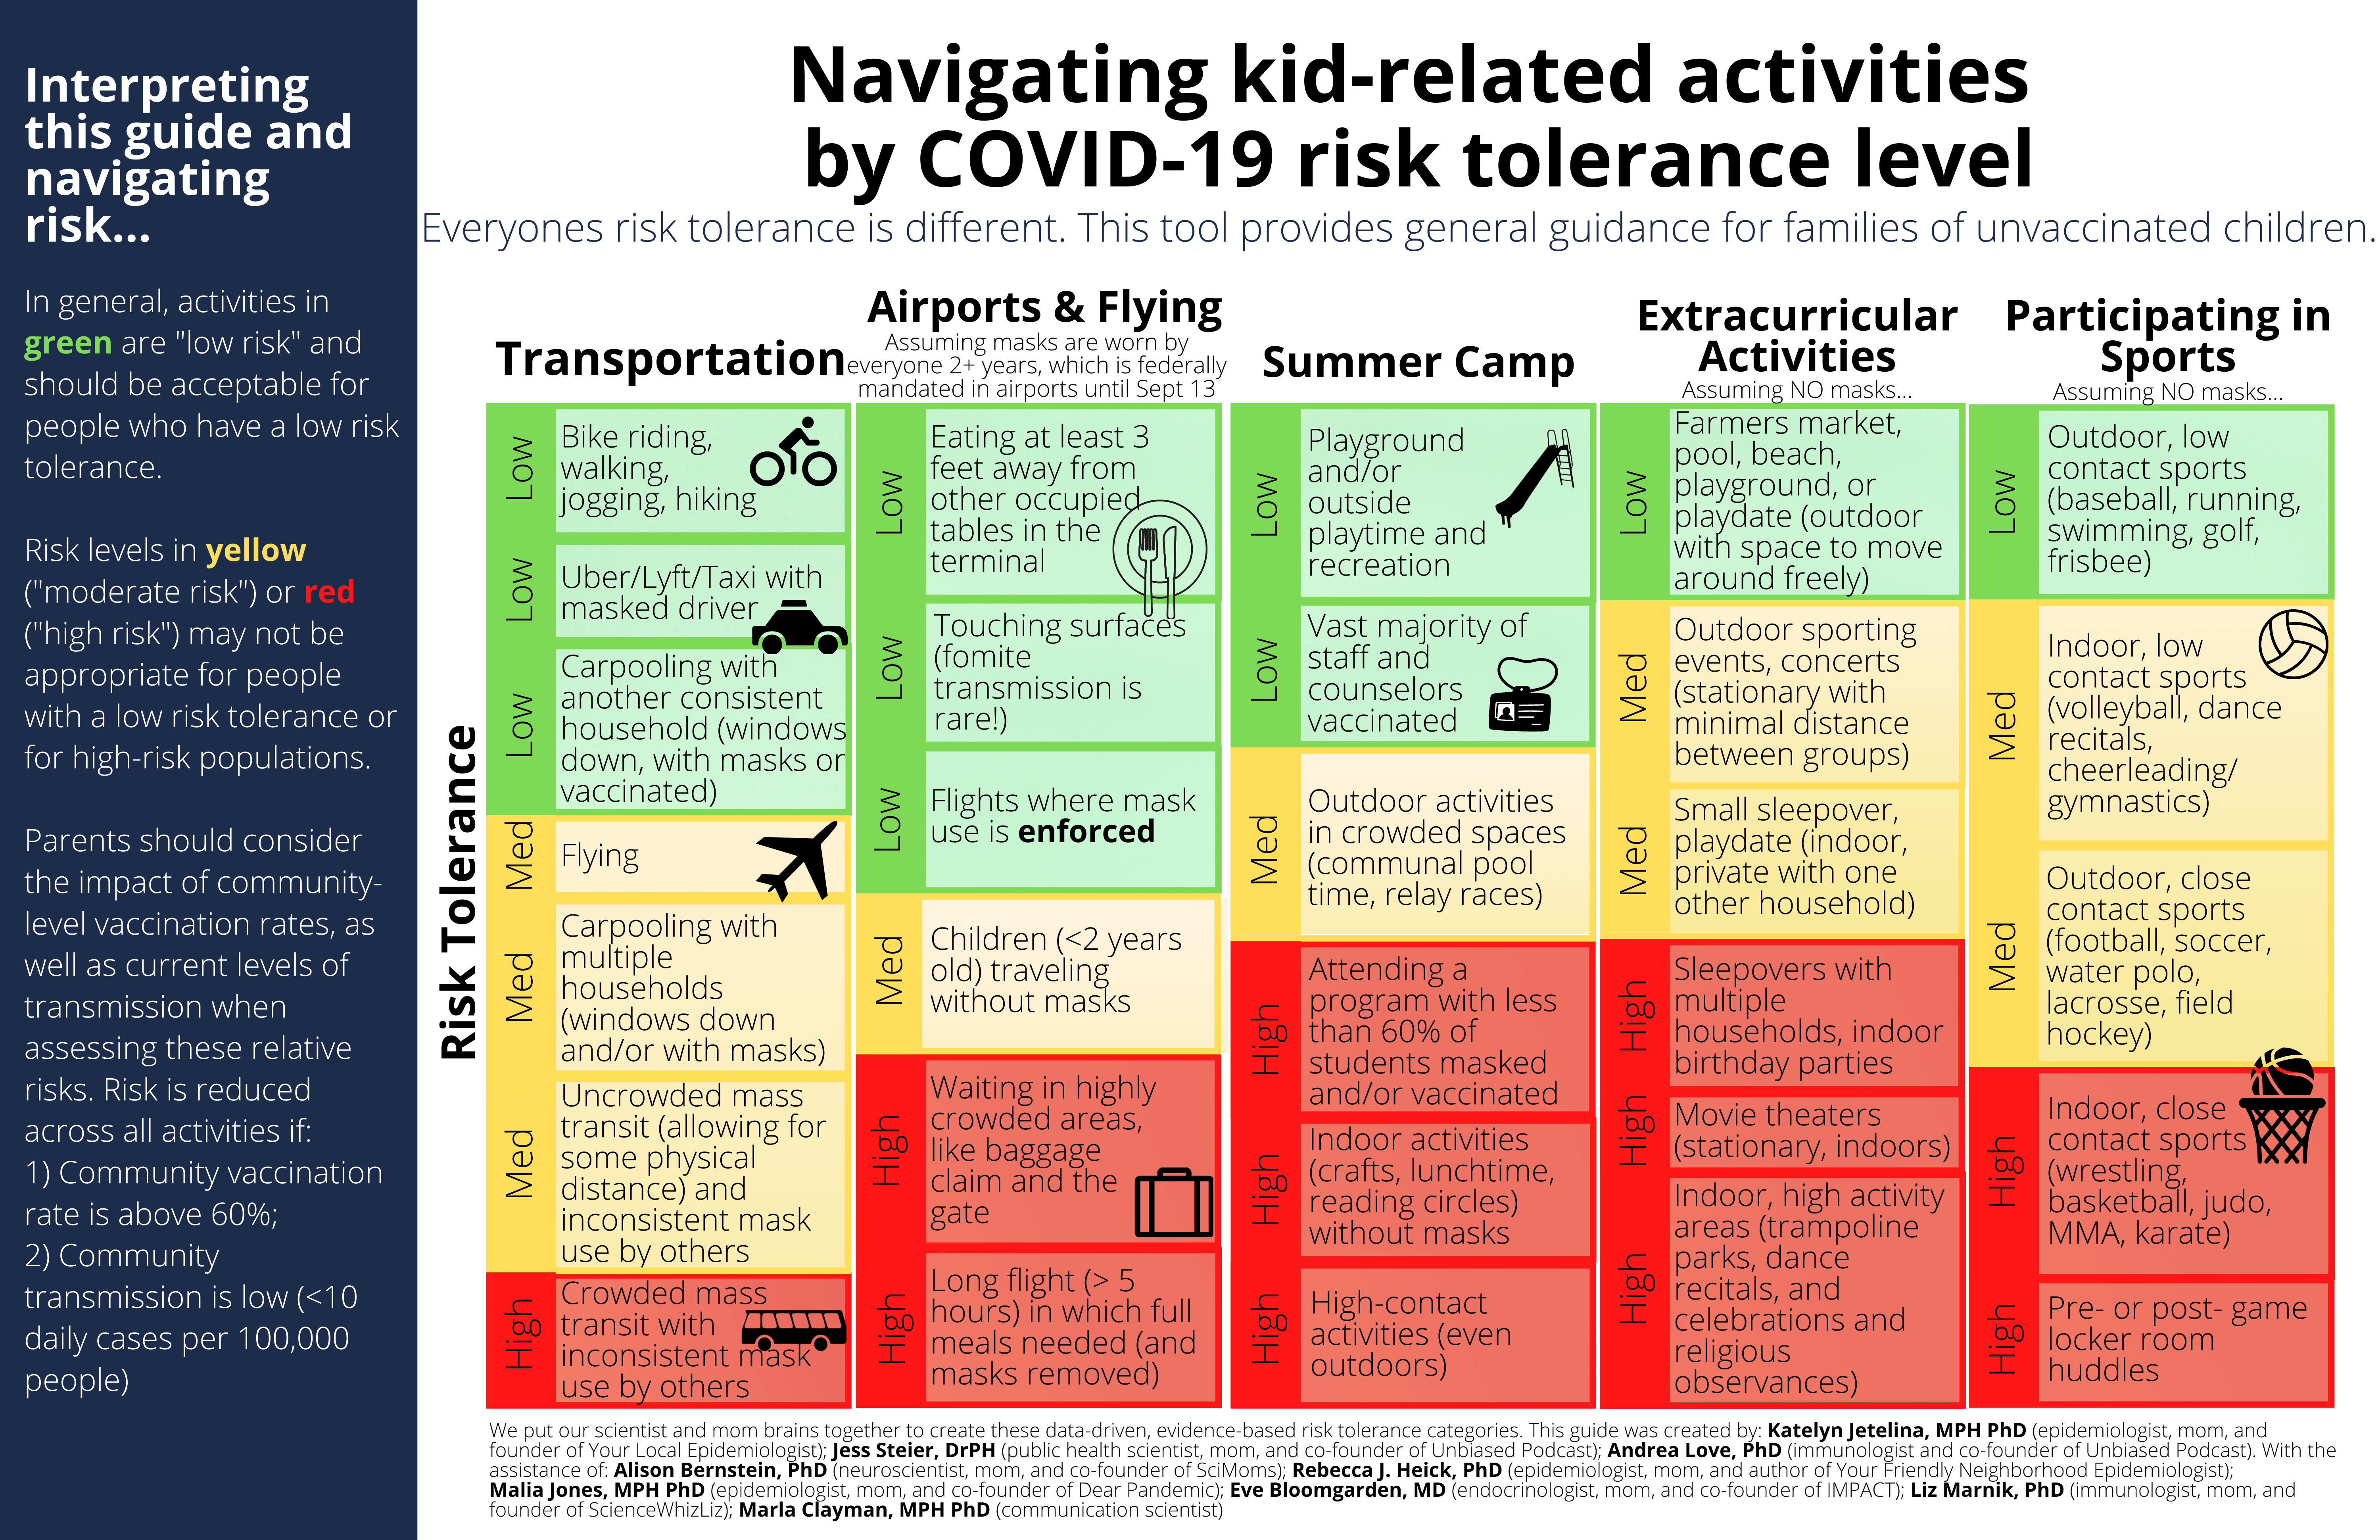 Navigating kid-related activities by COVID-19 risk tolerance level